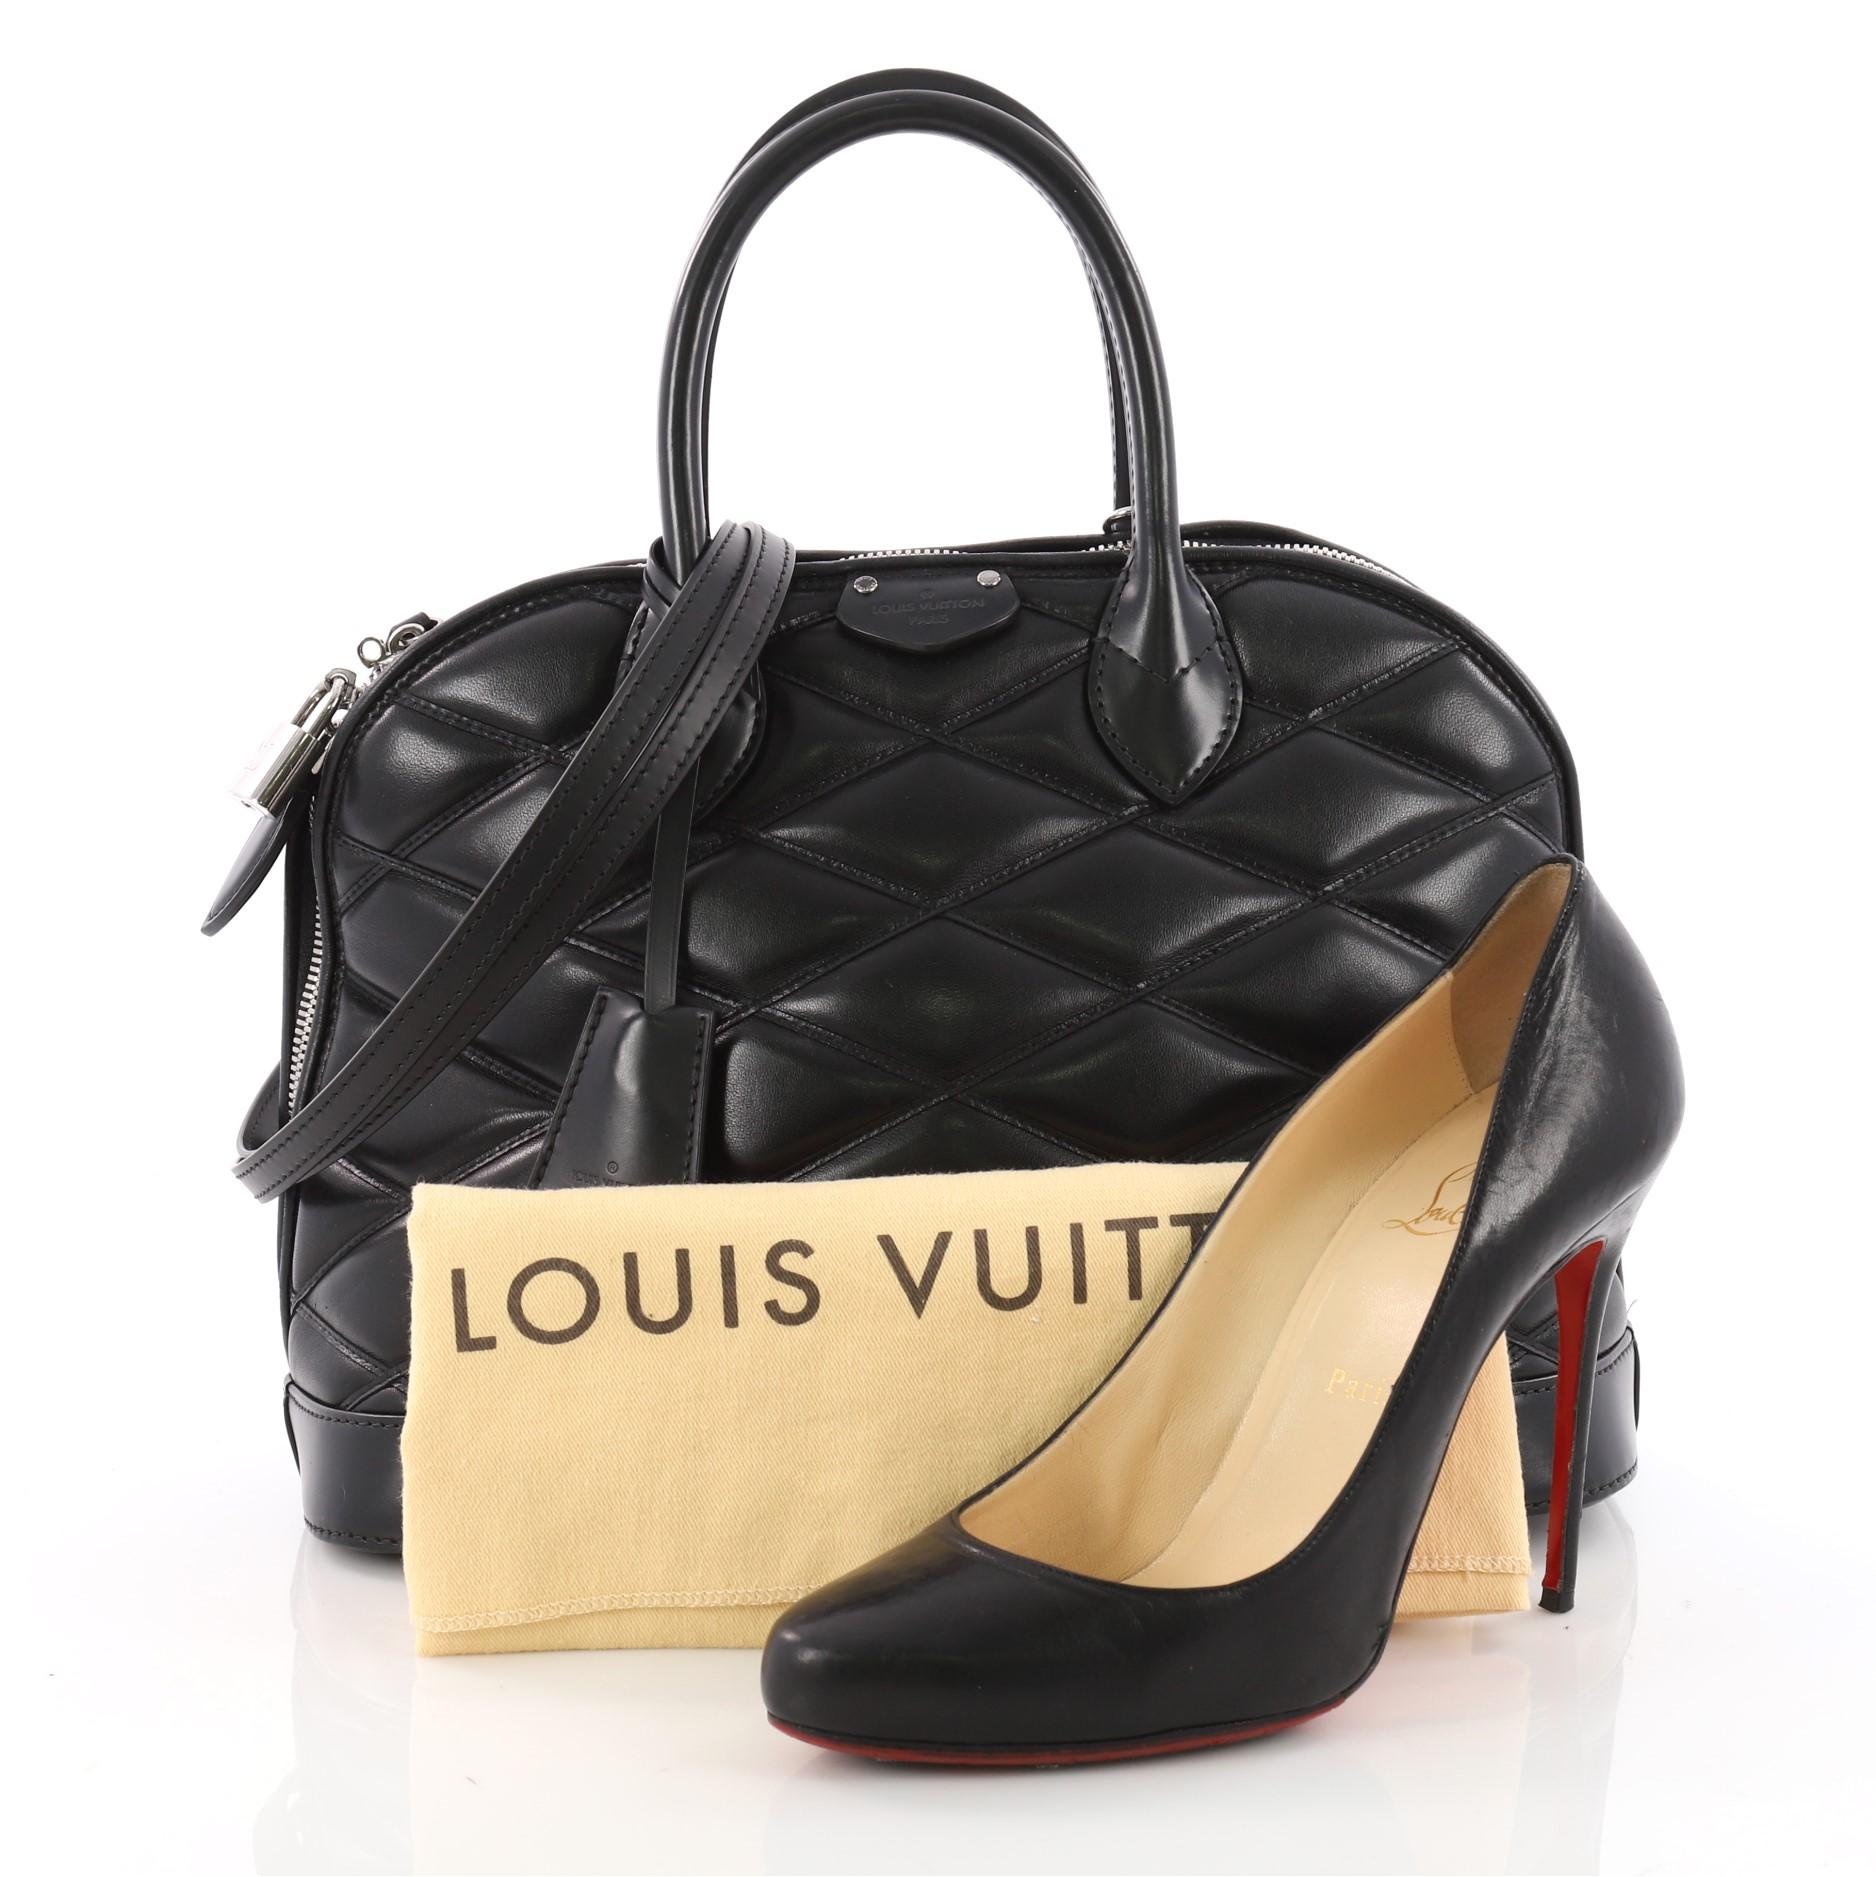 This authentic Louis Vuitton Alma Handbag Malletage Leather PM is the perfect bag to use for your needs for daytime or evening with luxury and style. Crafted in black malletage leather, this exceptional bag features dual-rolled leather handles,